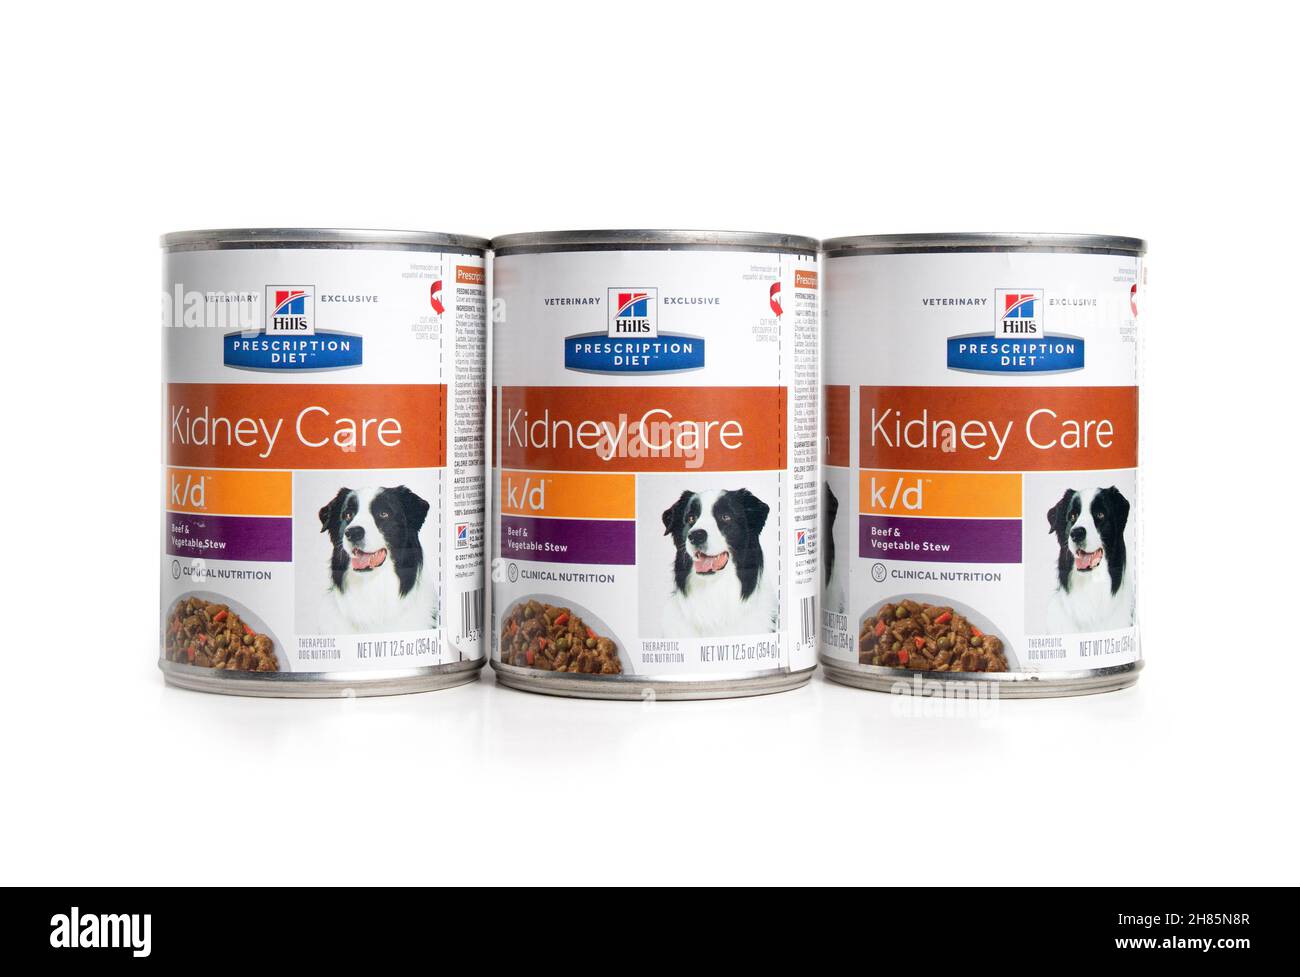 VANCOUVER, CANADA - NOVEMBER 25, 2021: Hill's kidney care dog food cans. Three pet food cans formulated for animals with kidney problems or chronic ki Stock Photo